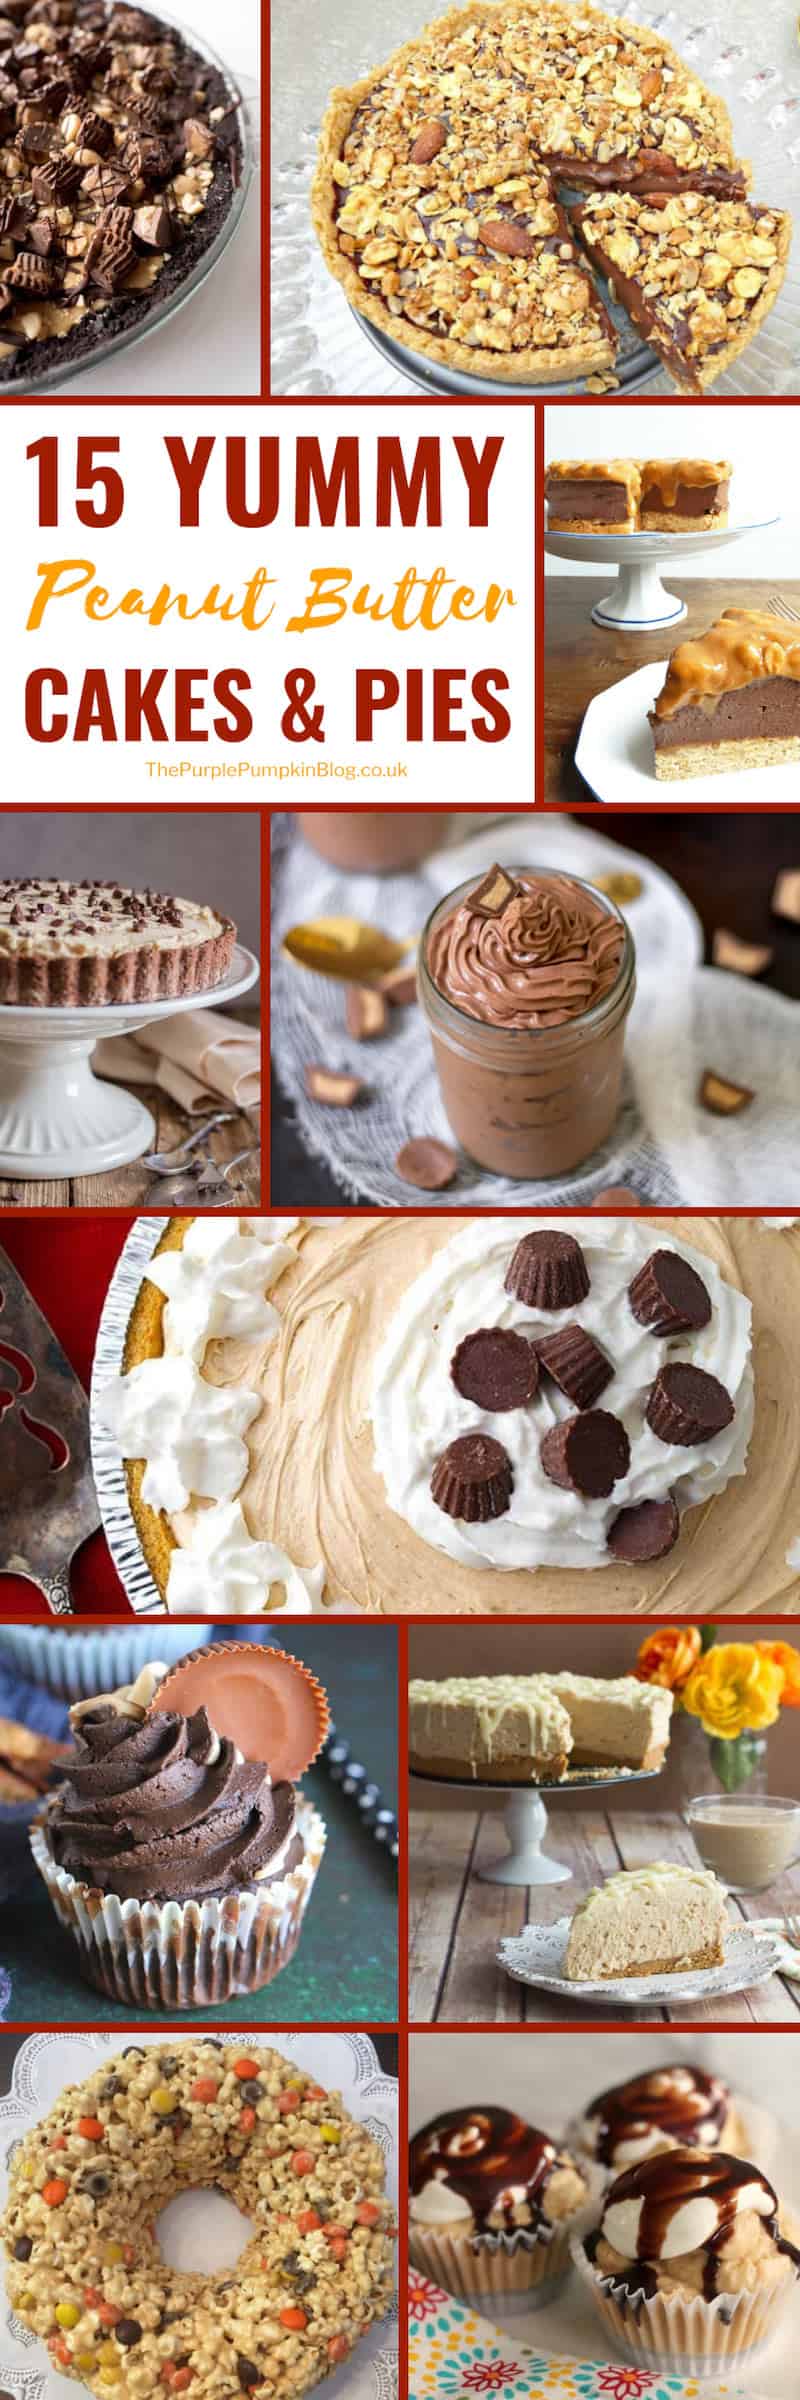 Do you love peanut butter? Do you love cake? Well, you're going to love this selection of yummy Peanut Butter Cakes & Pies! This roundup of peanut butter recipes include peanut butter cakes that are dairy-free, egg-free, gluten-free, and low-carb! There are no-bake cakes, cheesecake, and peanut butter pie recipes, as well as baked goods. Peanut butter lovers need to pin this now! #PeanutButterCakes #PeanutButterRecipes #PeanutButterPies #ThePurplePumpkinBlog